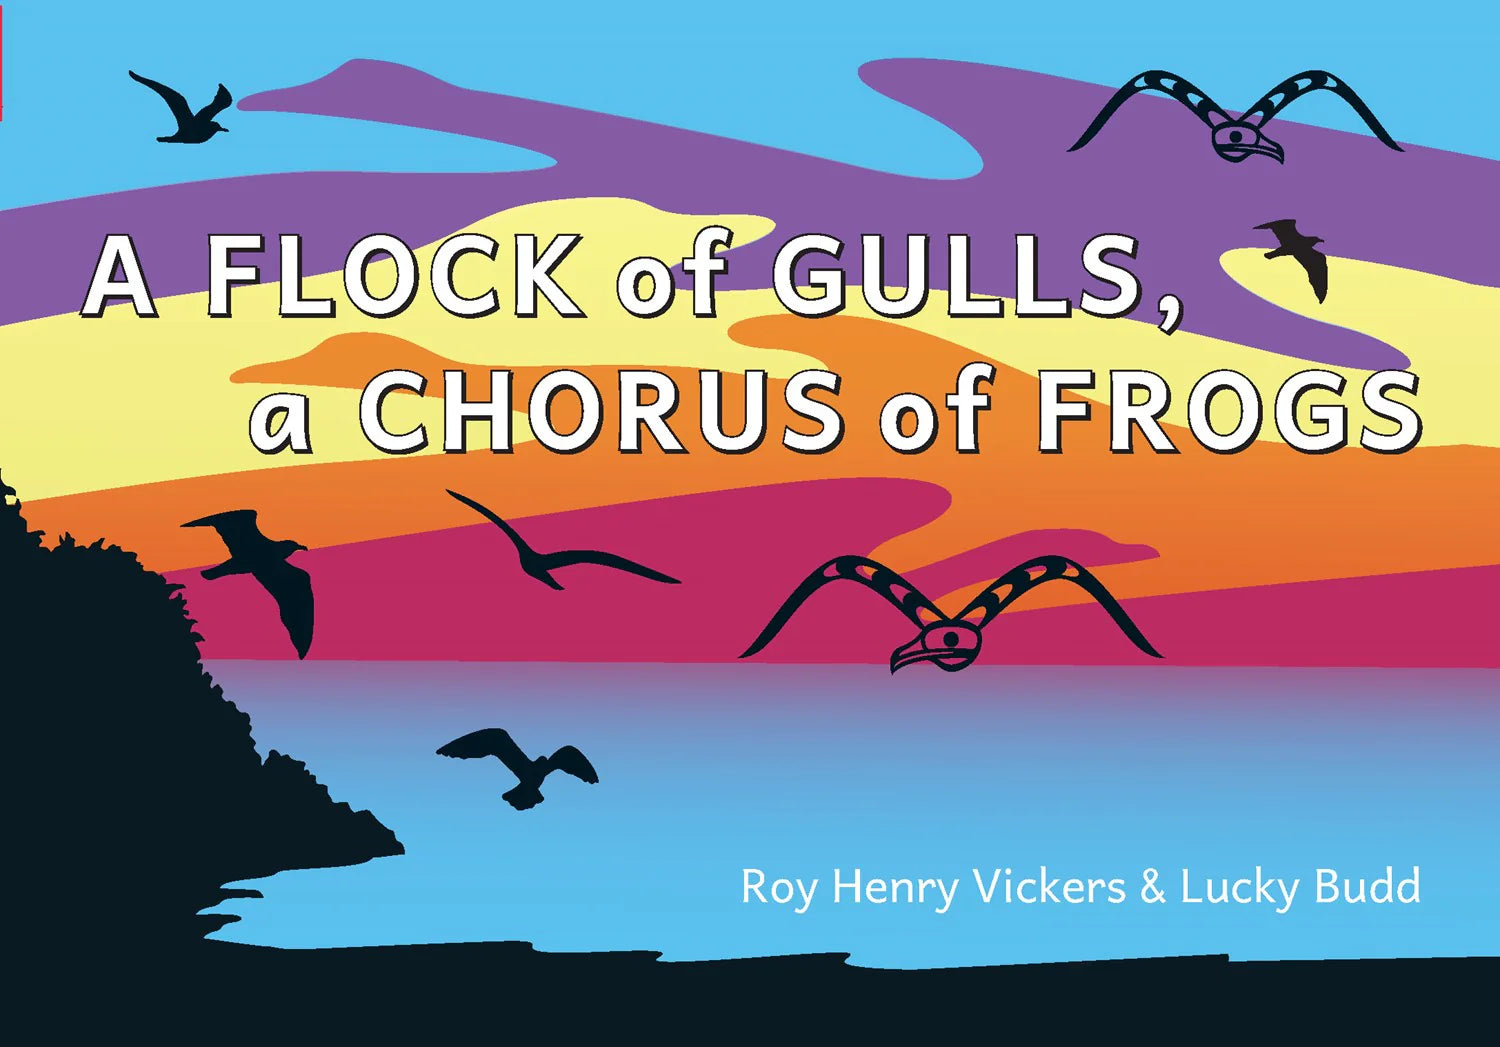 Board Book - A Flock of Gulls, a Chorus of Frogs